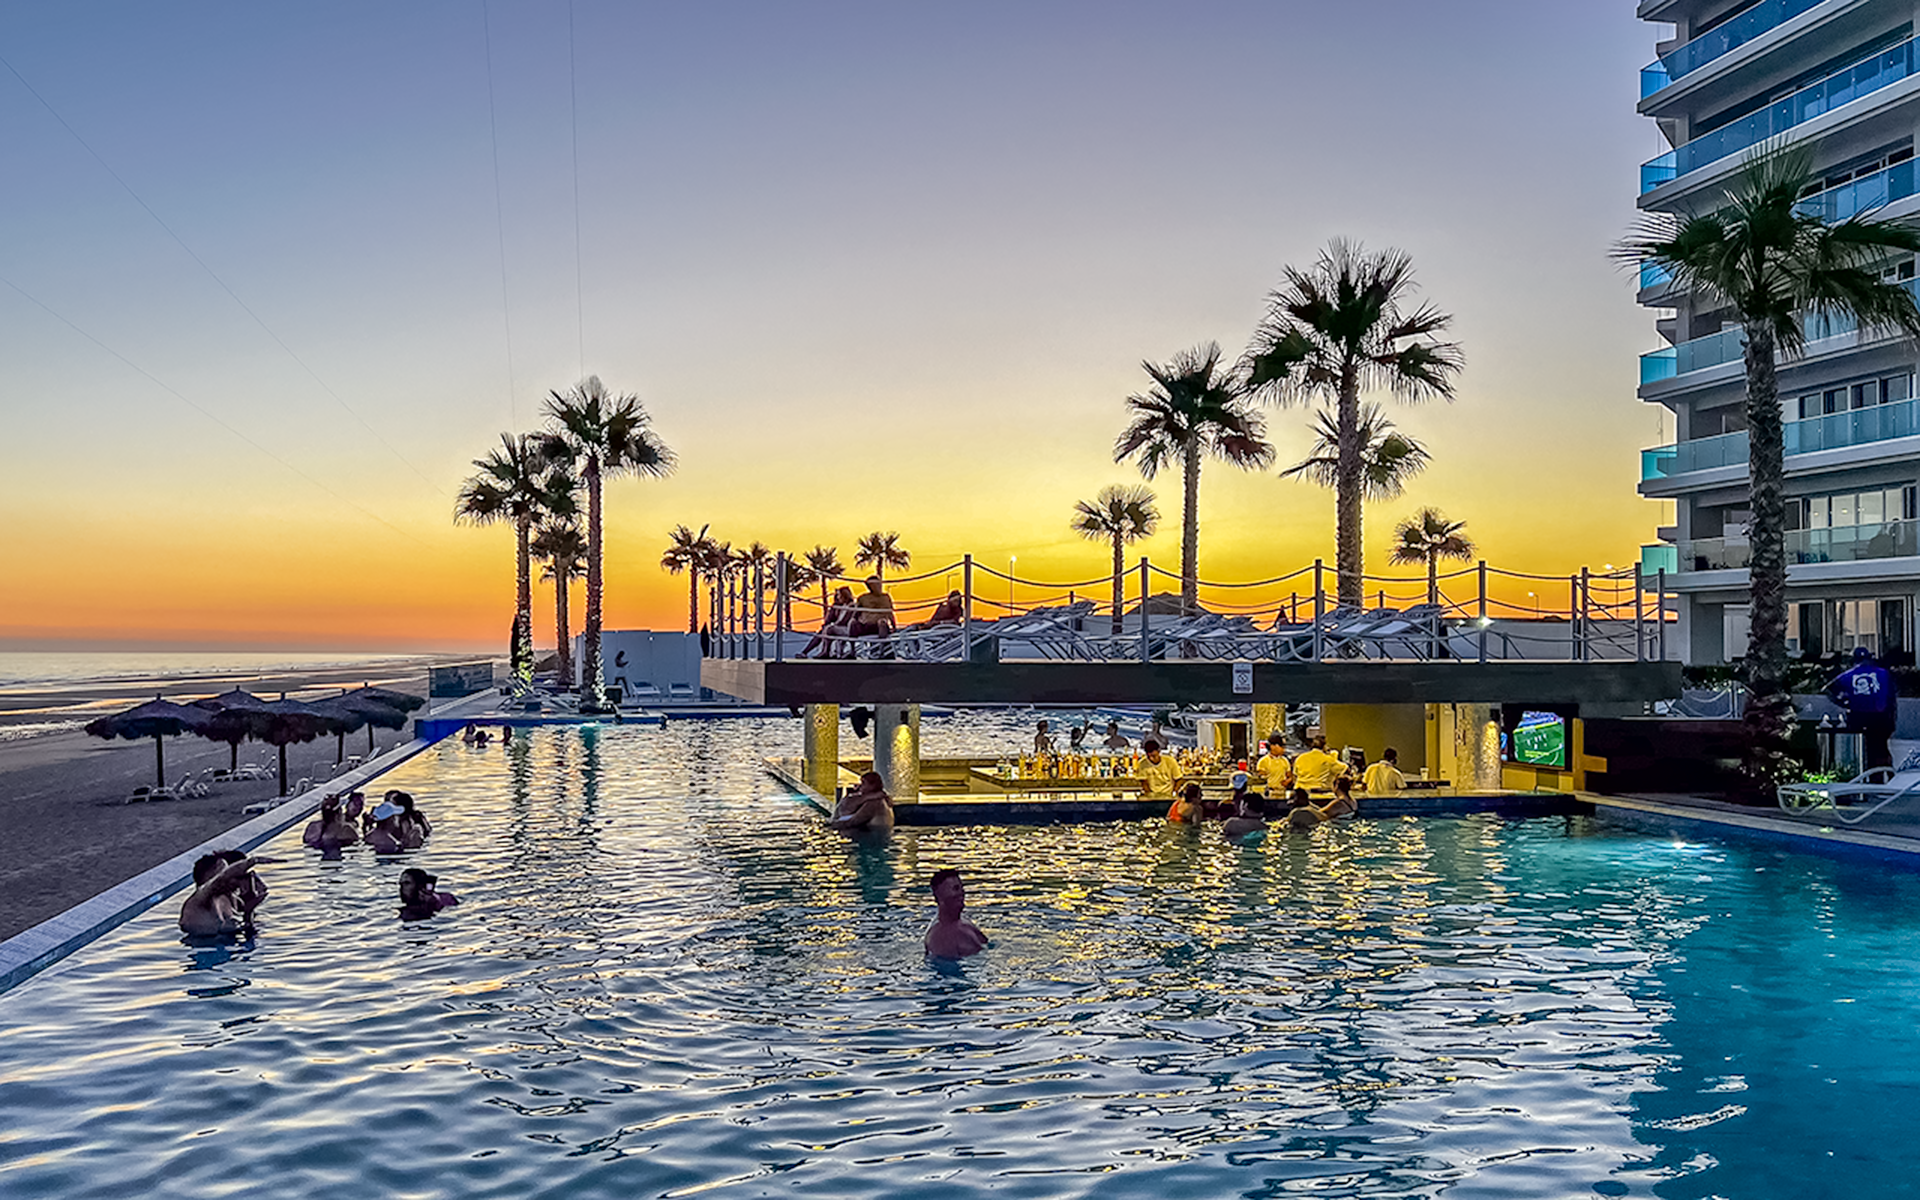 The pool and swim up bar at sunset